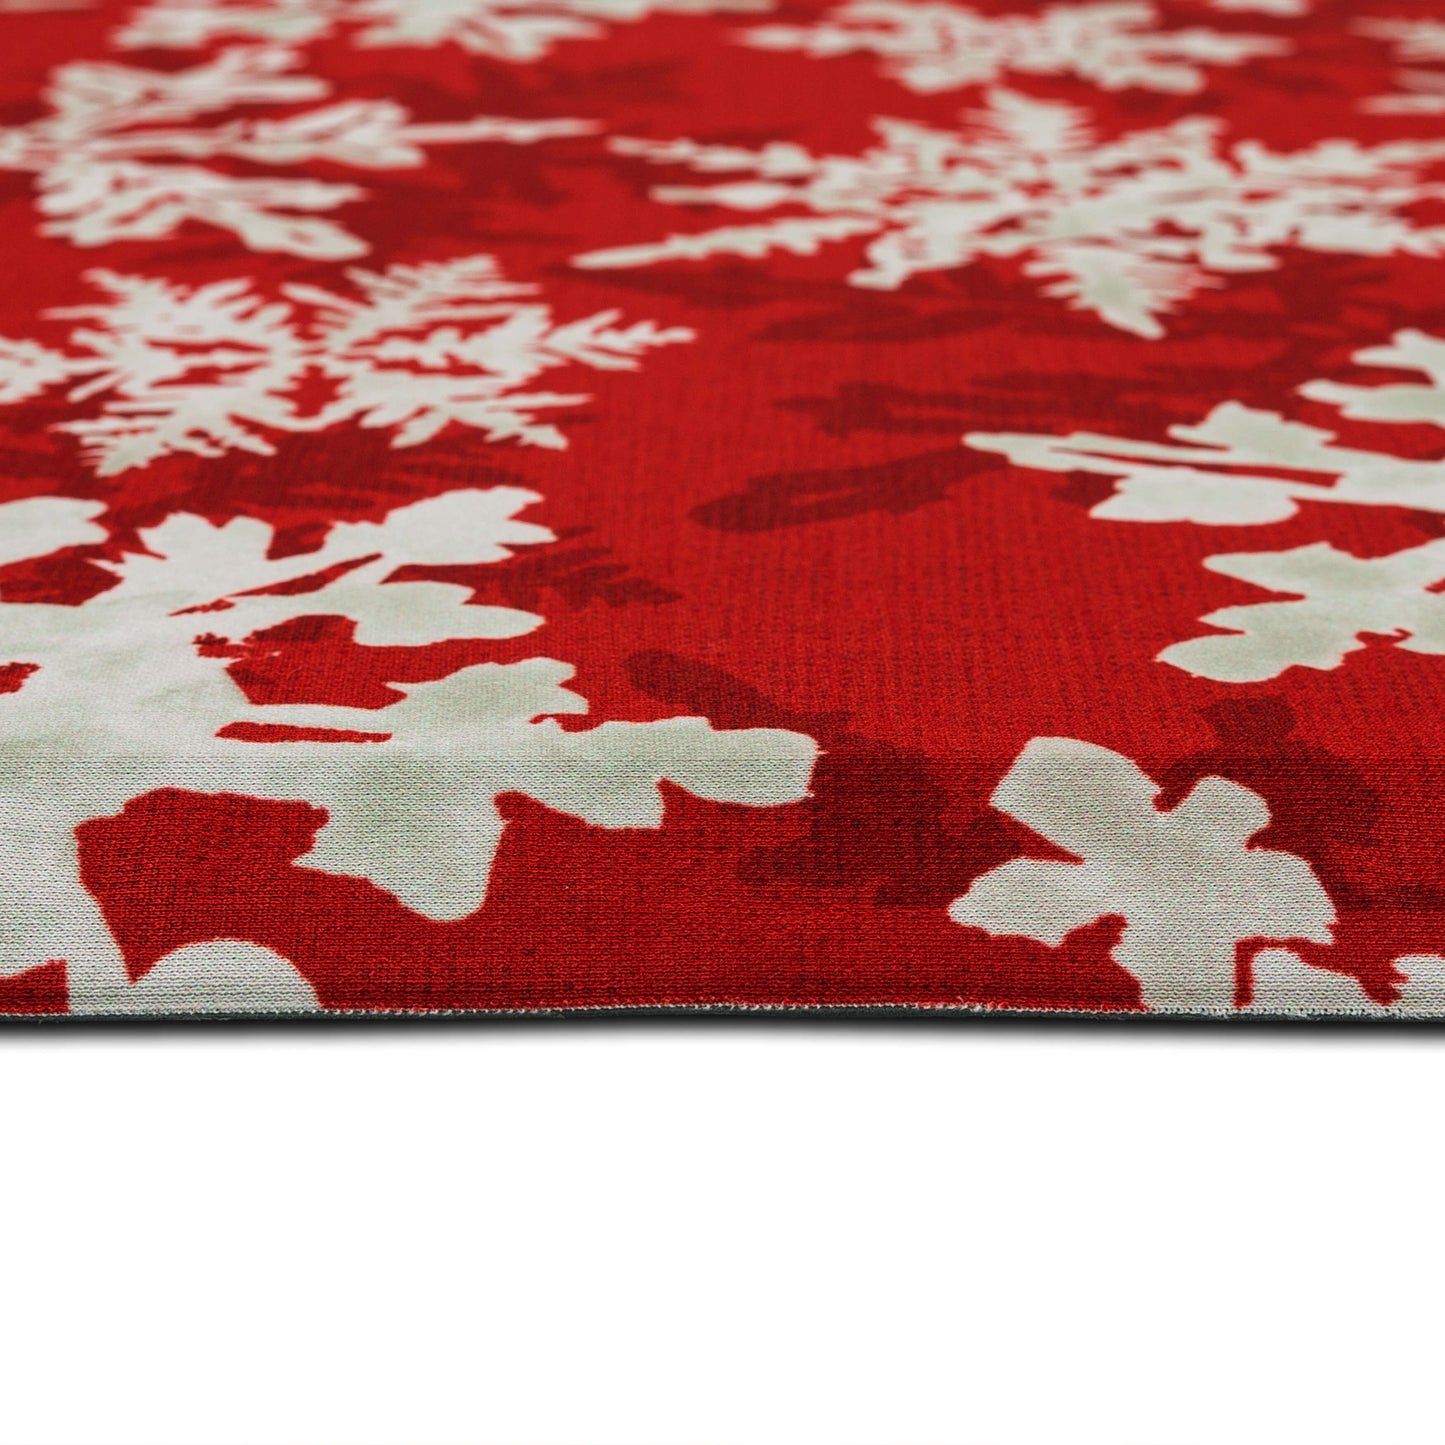 Snowflakes Red Mat